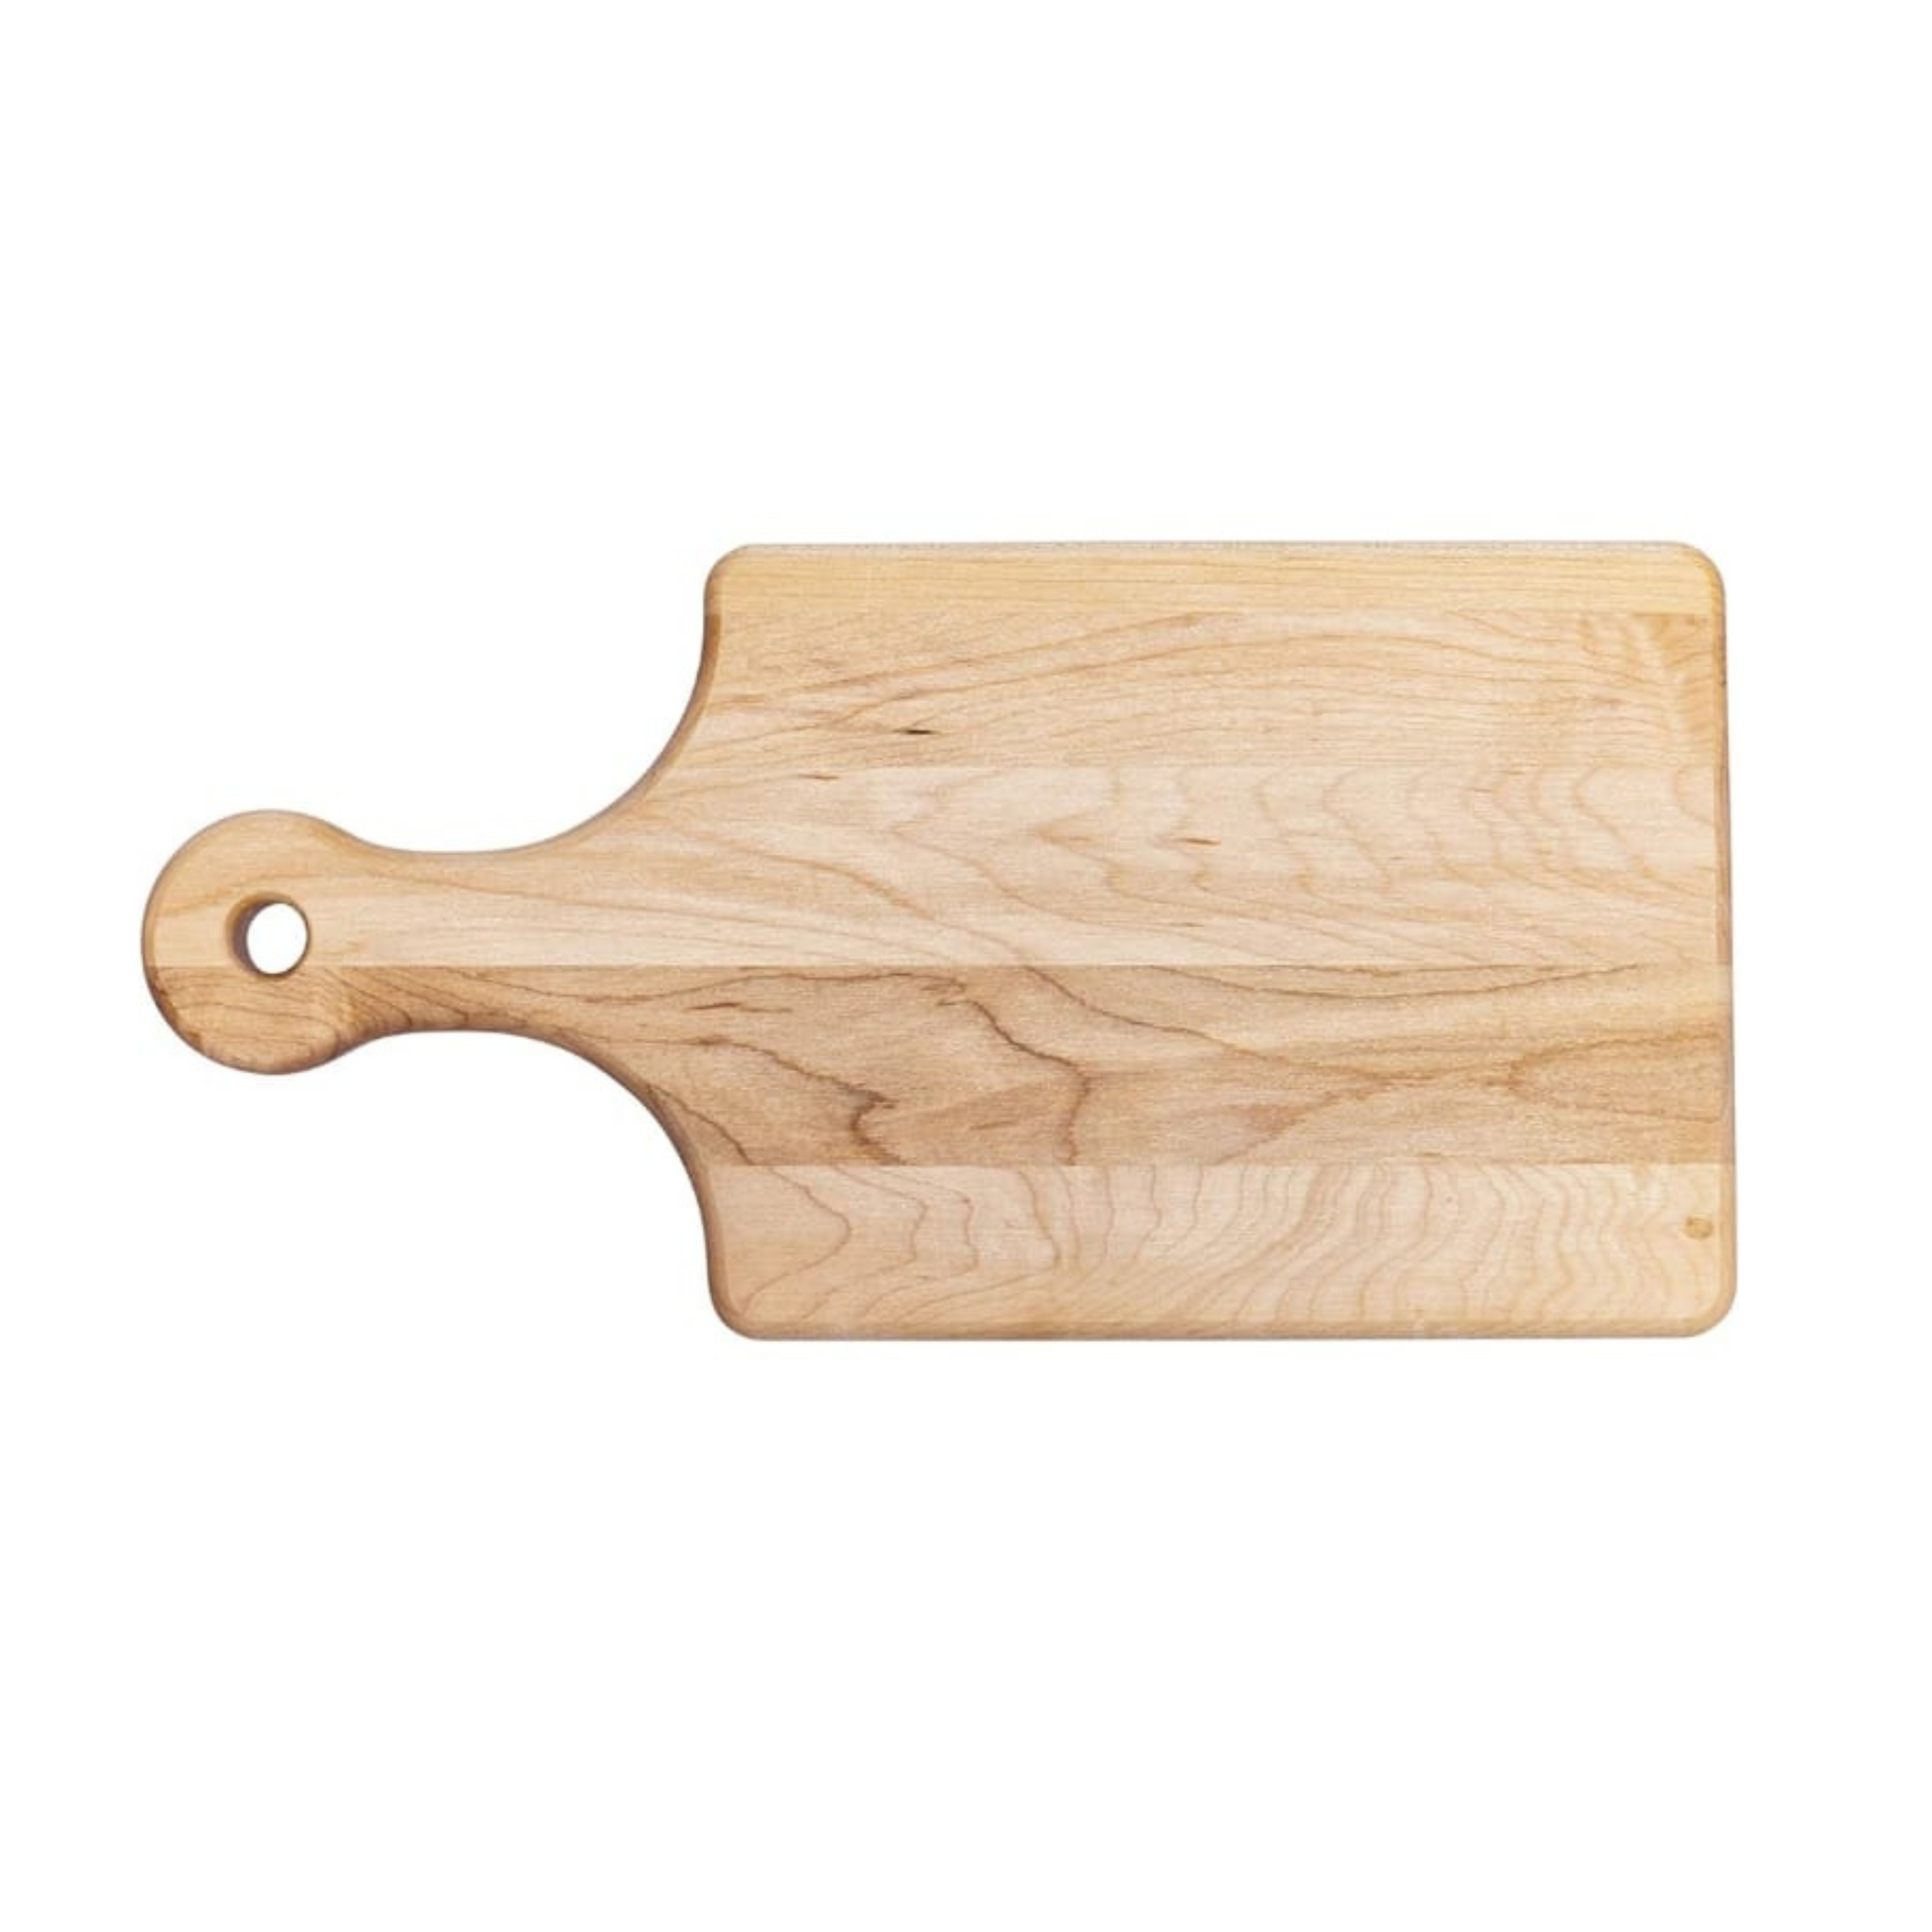 Cats Are My Favorite People Cutting Board - Premium Cutting Boards from Hipster Lasers - Just $70! Shop now at Hipster Lasers